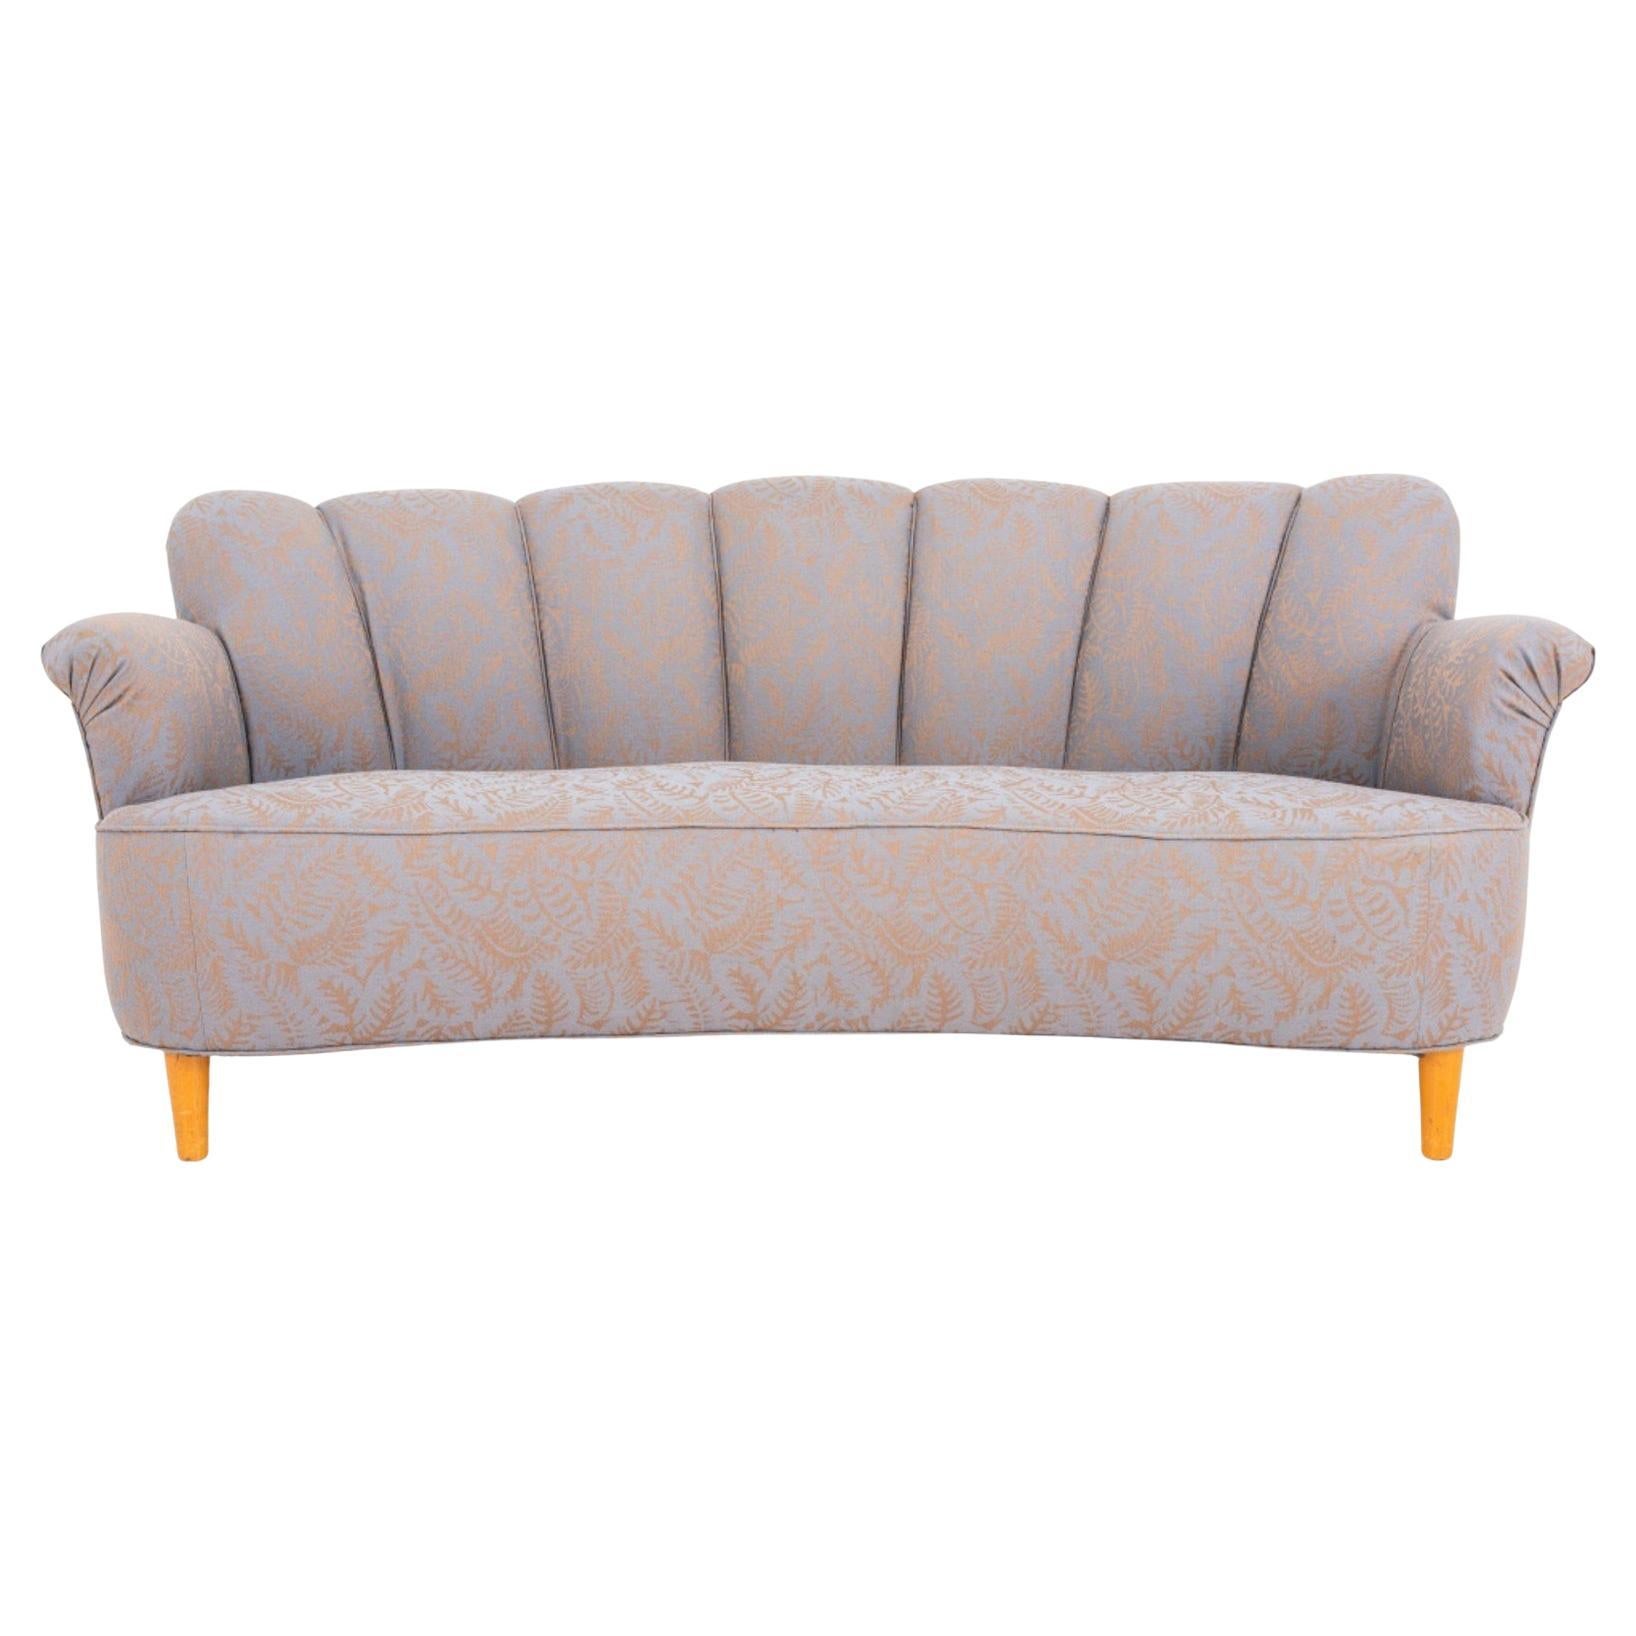 Vintage Semicircular Cocktail Sofa, 1960s For Sale